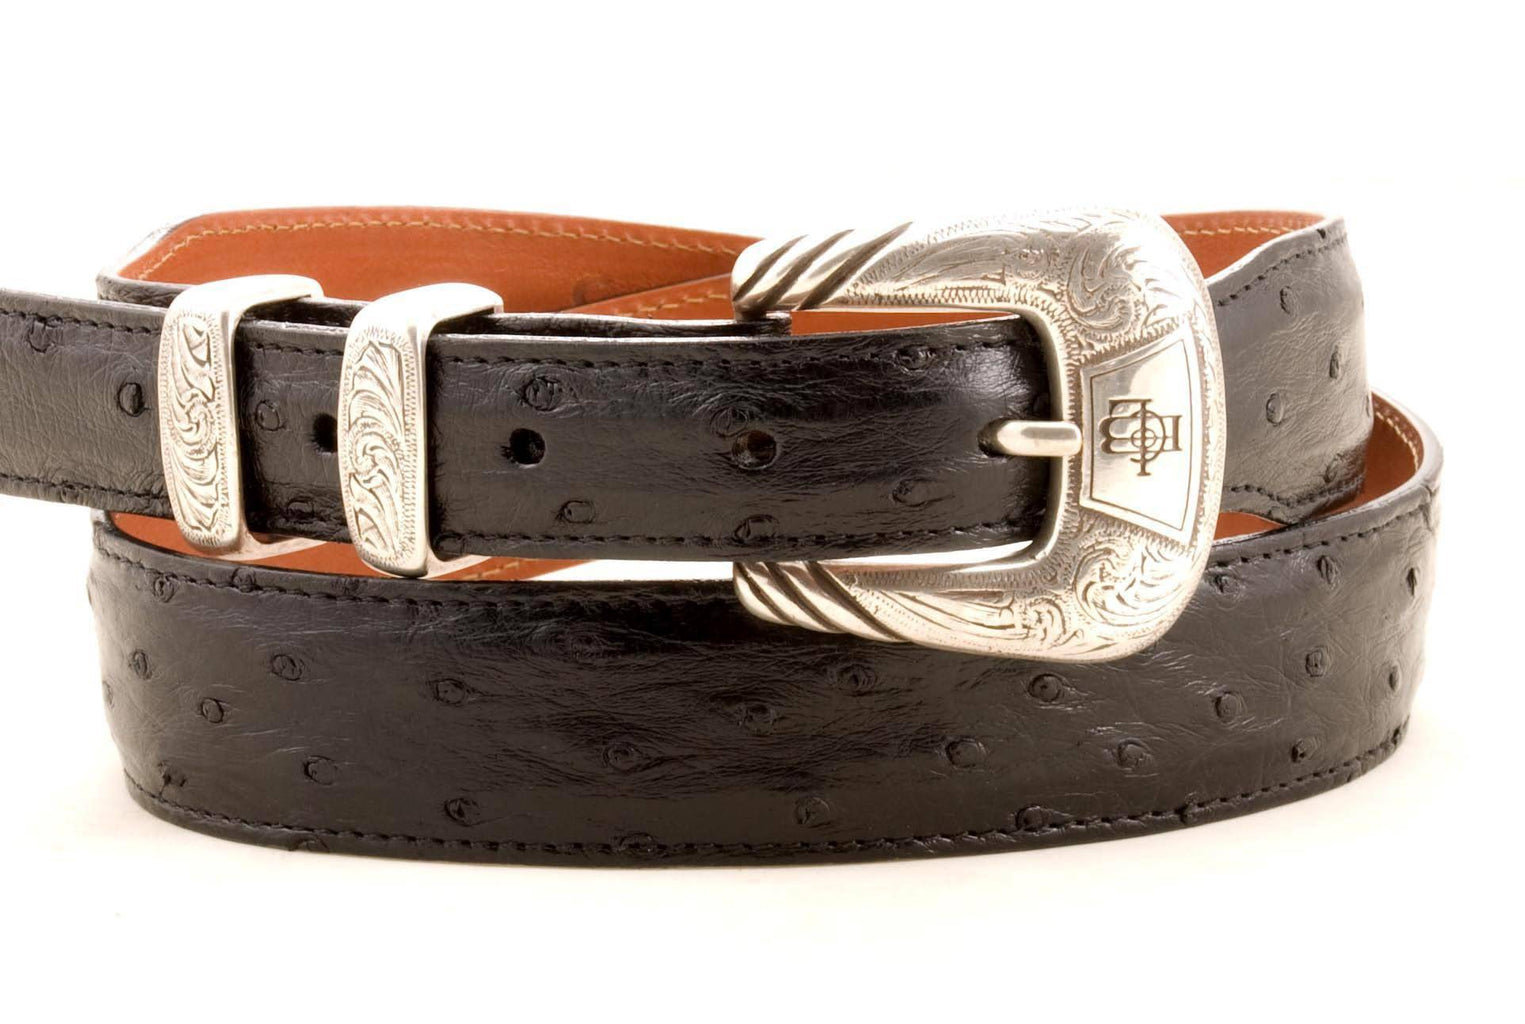 Lucchese Men's Black Full Quill Ostrich Leather Belt